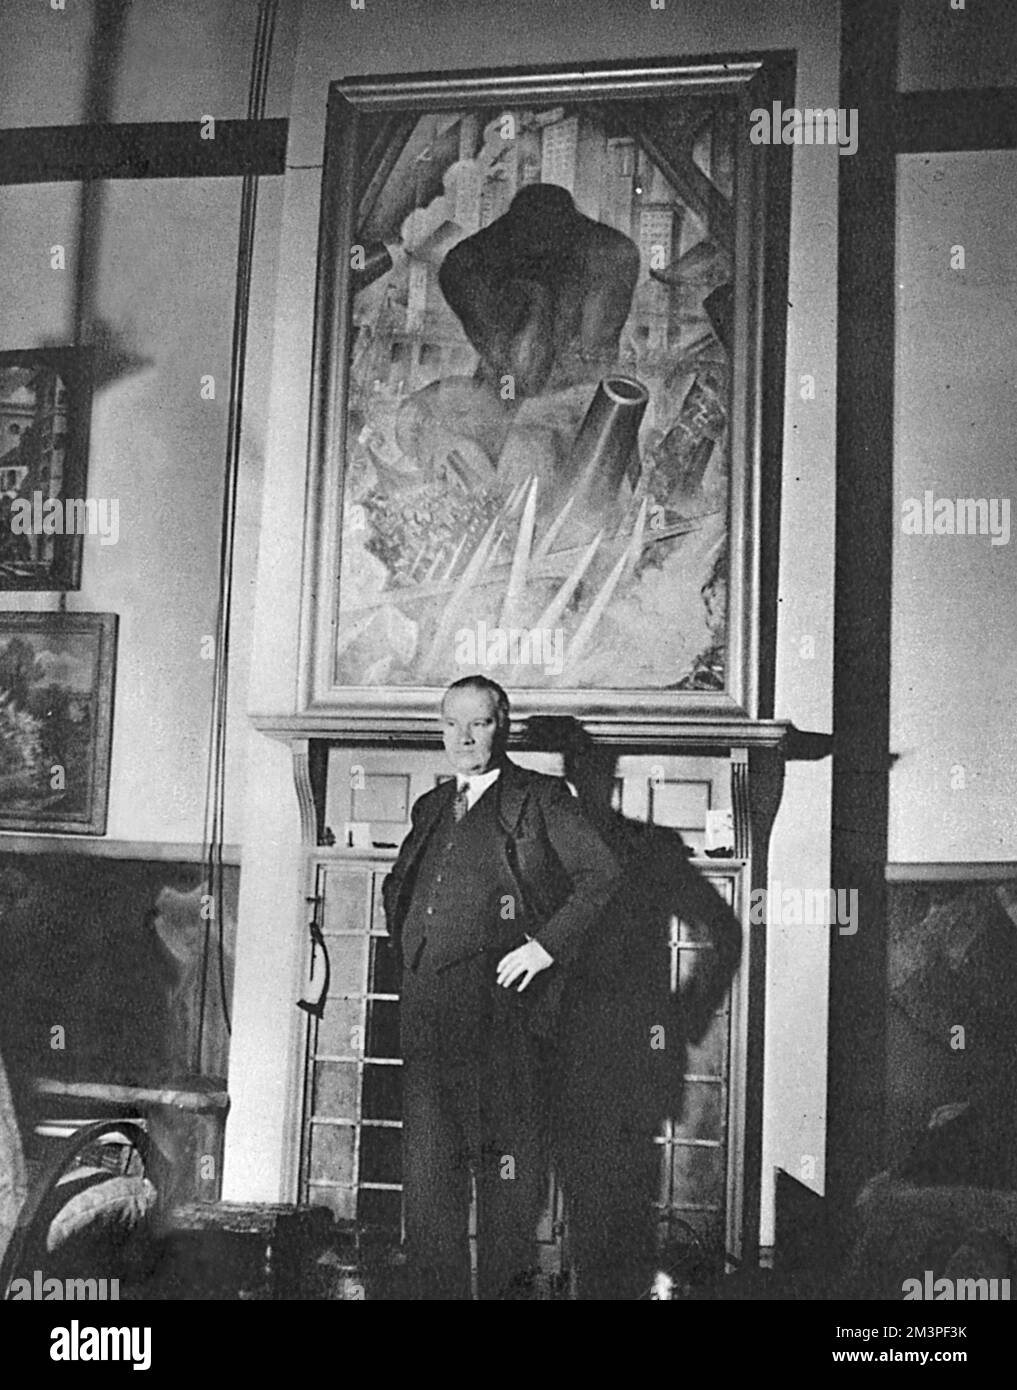 Christopher Richard Wynne Nevinson (1889 - 1946), English artist, standing in front of one of his own works entitled 'Twentieth Century Man'. Nevinson was one of the most famous of War Artists during World War One.     Date: 1939 Stock Photo